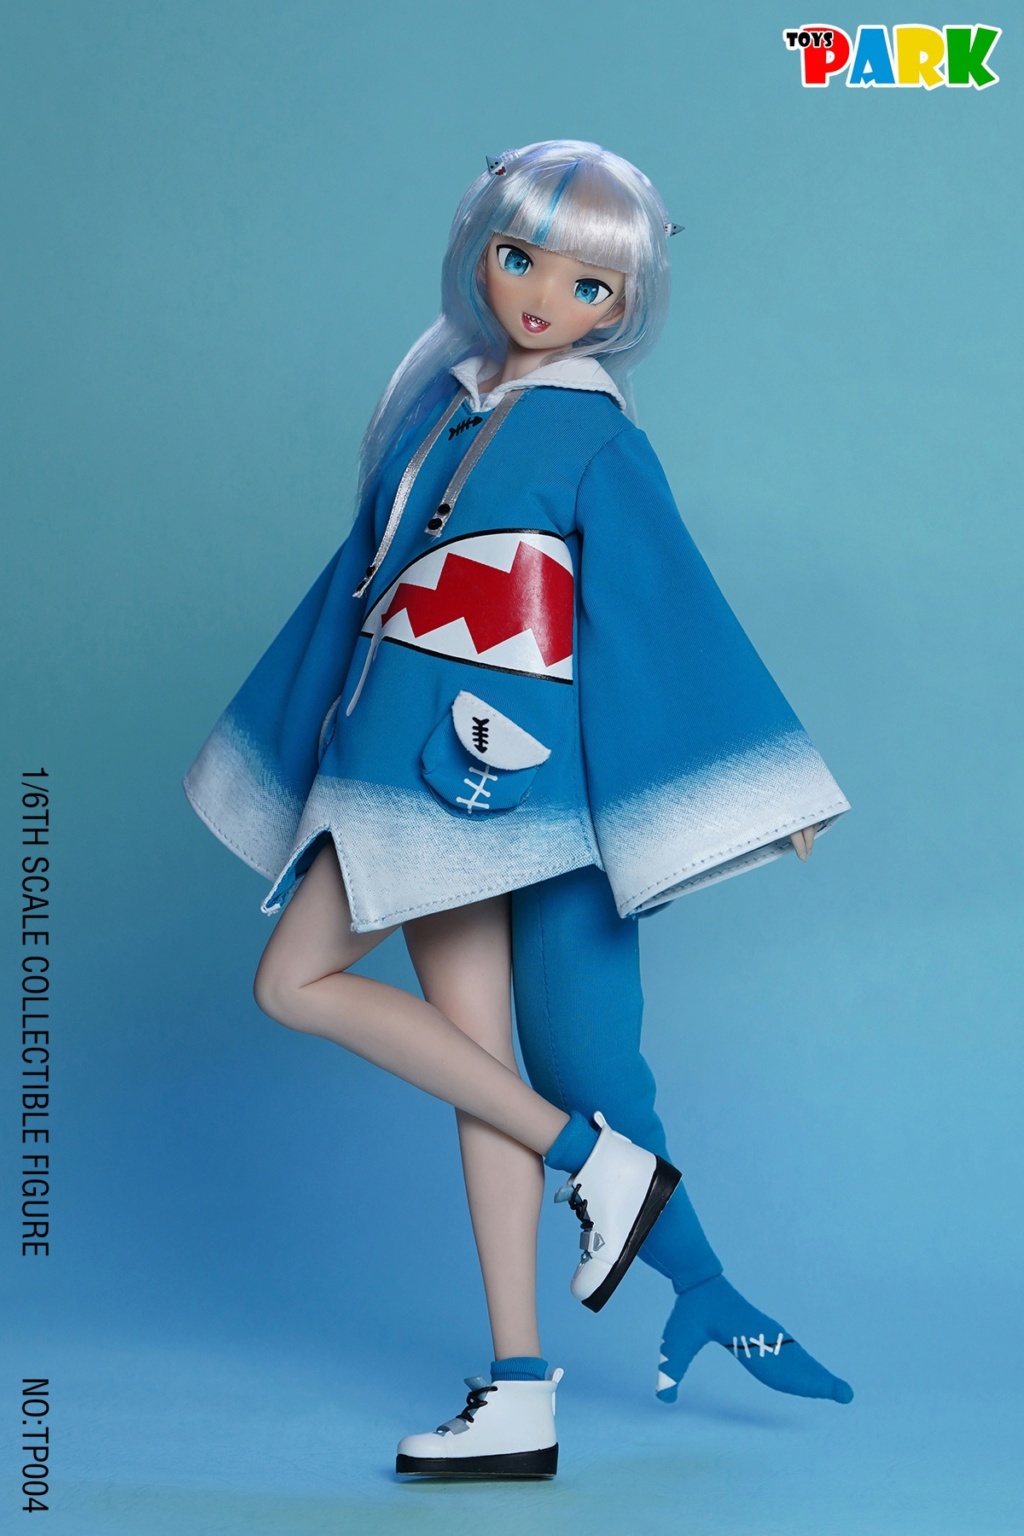 NEW PRODUCT: TOYS PARK: 1/6 Shark Girl Accessories Set #TP004 7e1a9510